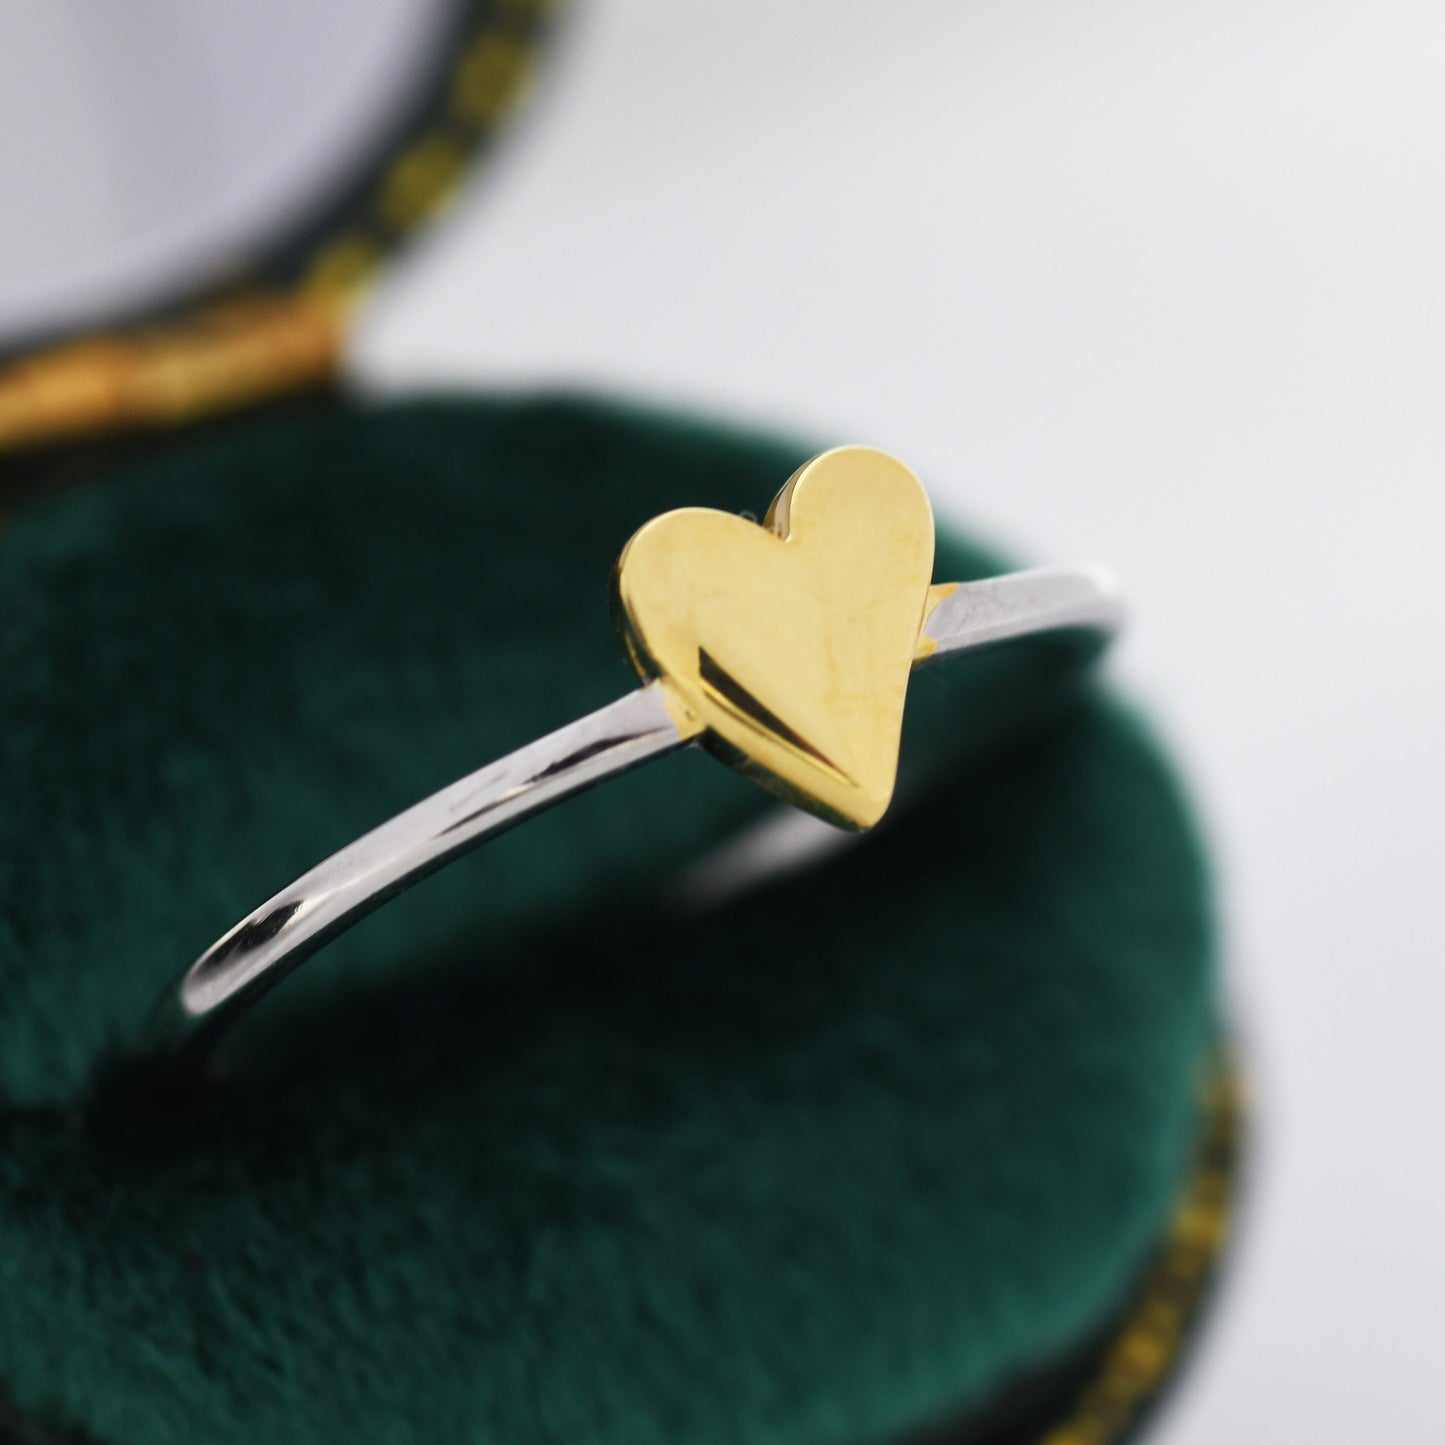 Heart Ring in Sterling Silver, Silver and Gold Two Tone Ring, Heart of Gold, Gold Heart Ring, Size US 5 - 8